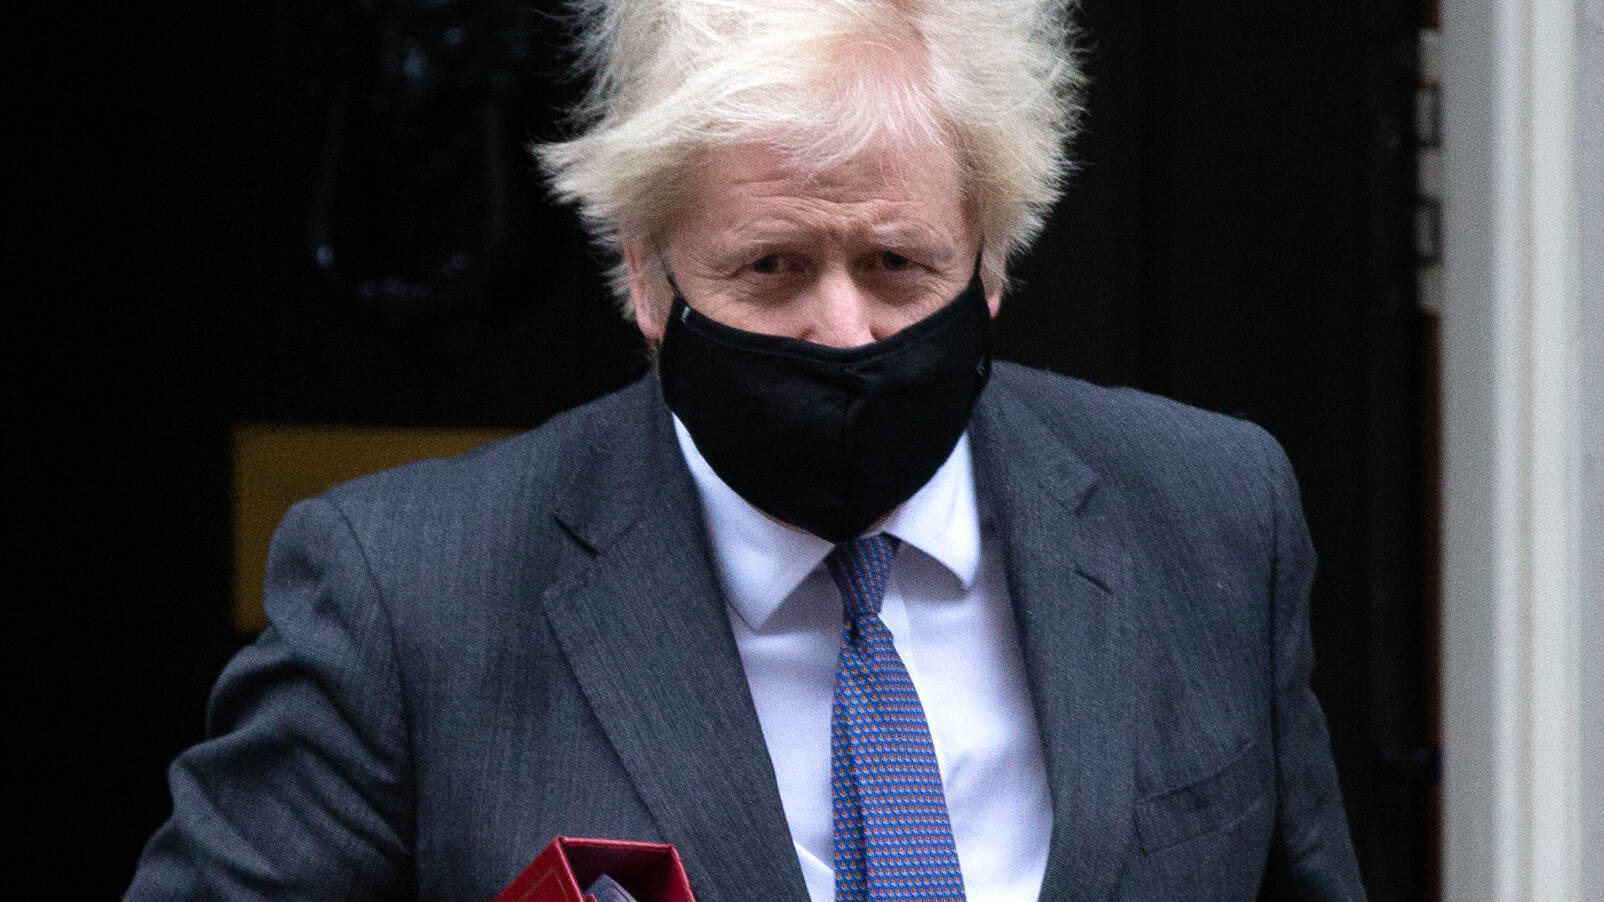  . 20/01/2021. London, United Kingdom. UK Prime Minister, Boris Johnson, leaves Number 10 Downing Street to go to the House of Commons for Prime Ministers Questions. He will face Keir Starmer across the despatch box on the day Joe Biden is sworn in a